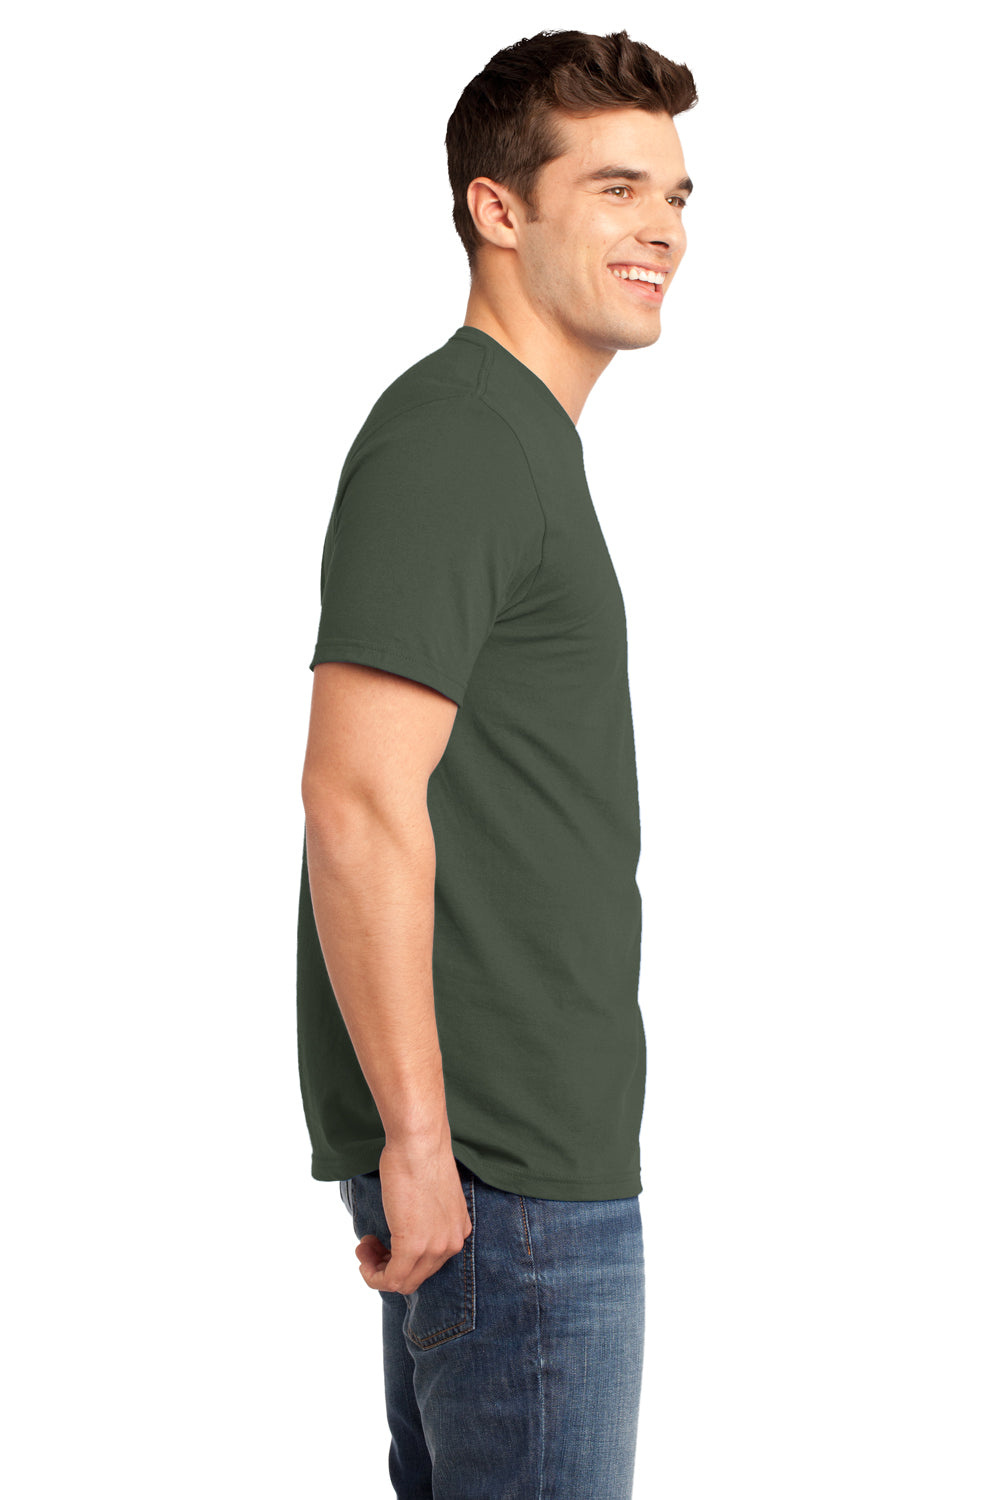 District DT6000 Mens Very Important Short Sleeve Crewneck T-Shirt Olive Green Side